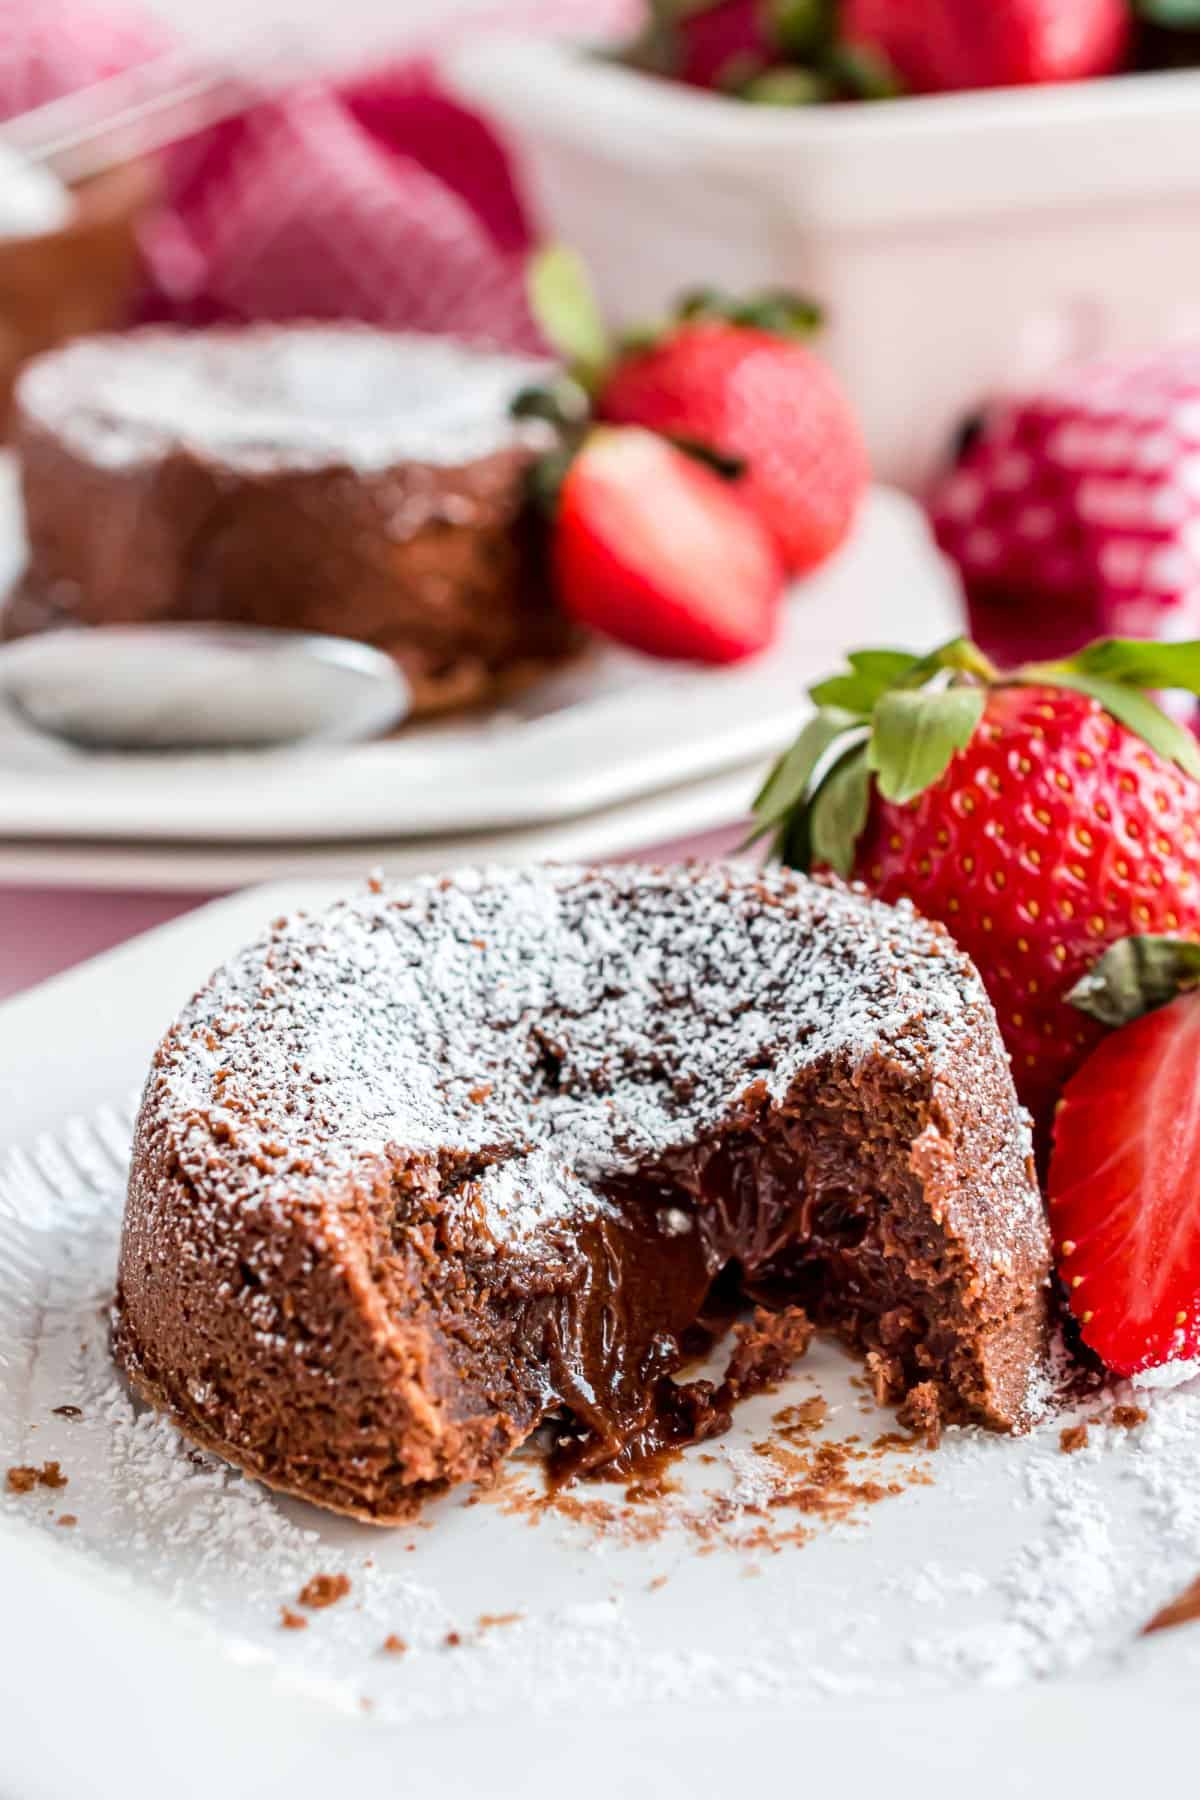 Individual sized chocolate lava cake with gooey center on a white plate with fresh strawberries.